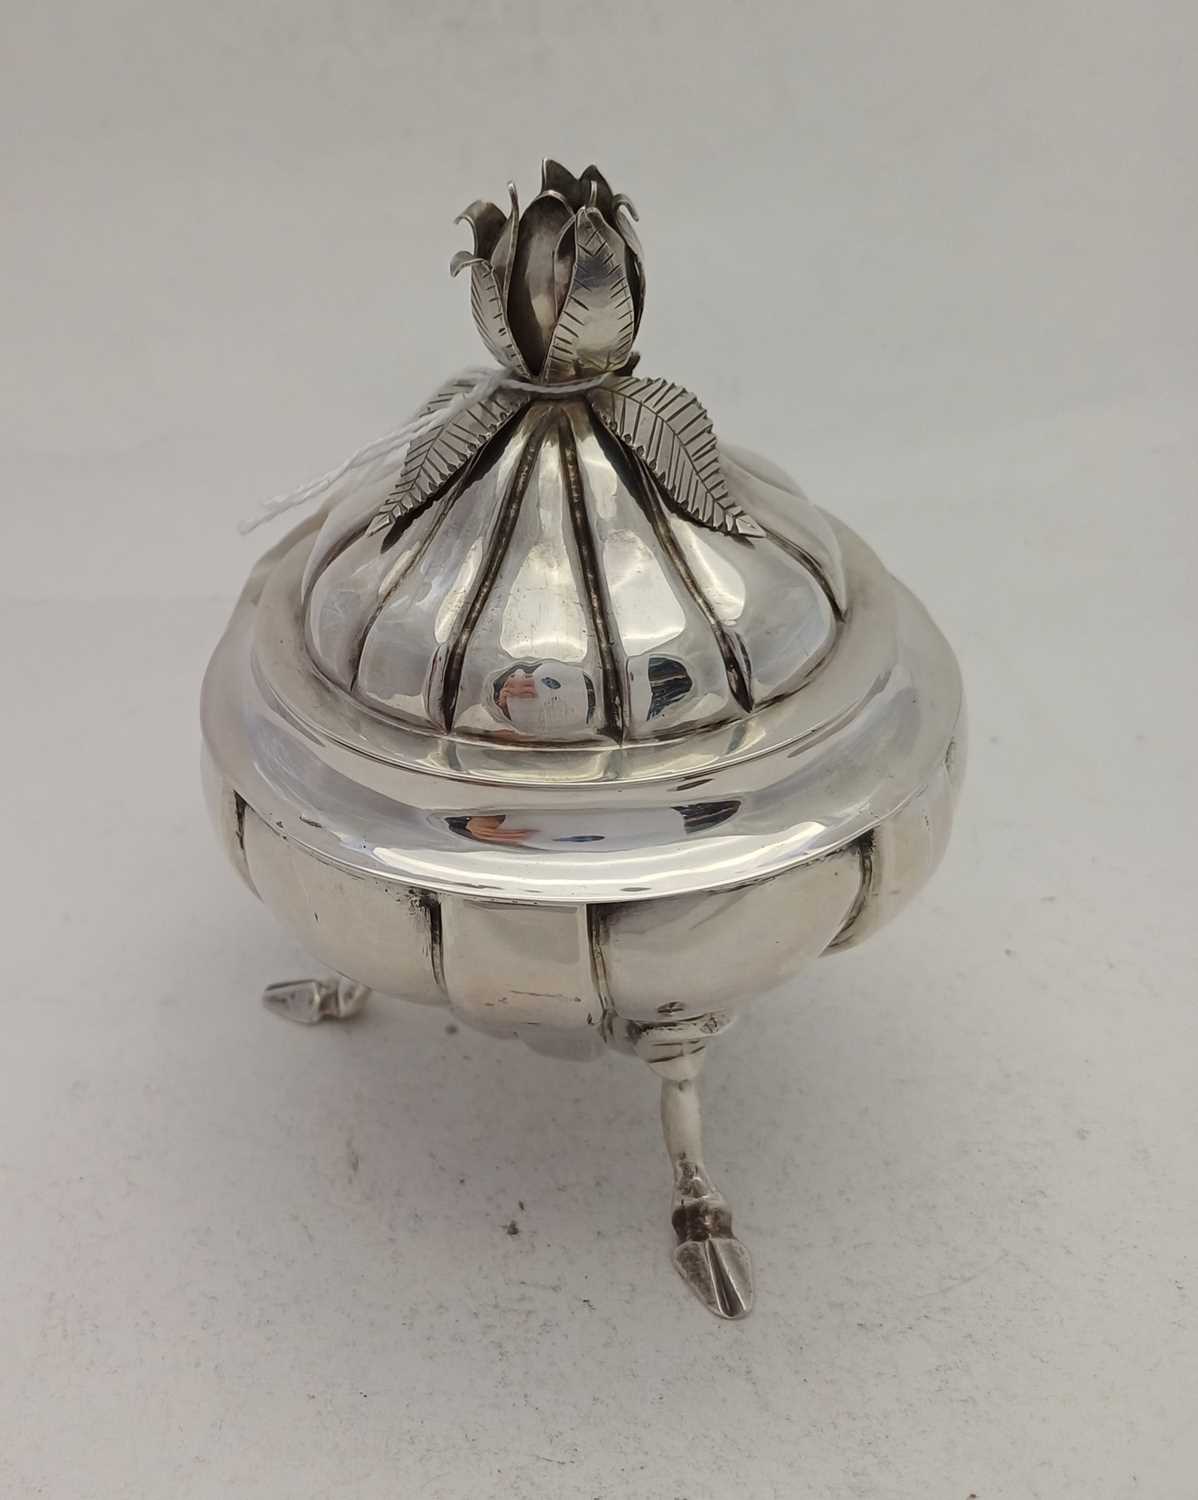 A Maltese Silver Sugar-Bowl and Cover, Maker's Mark Indistinct, 20th Century - Image 2 of 7